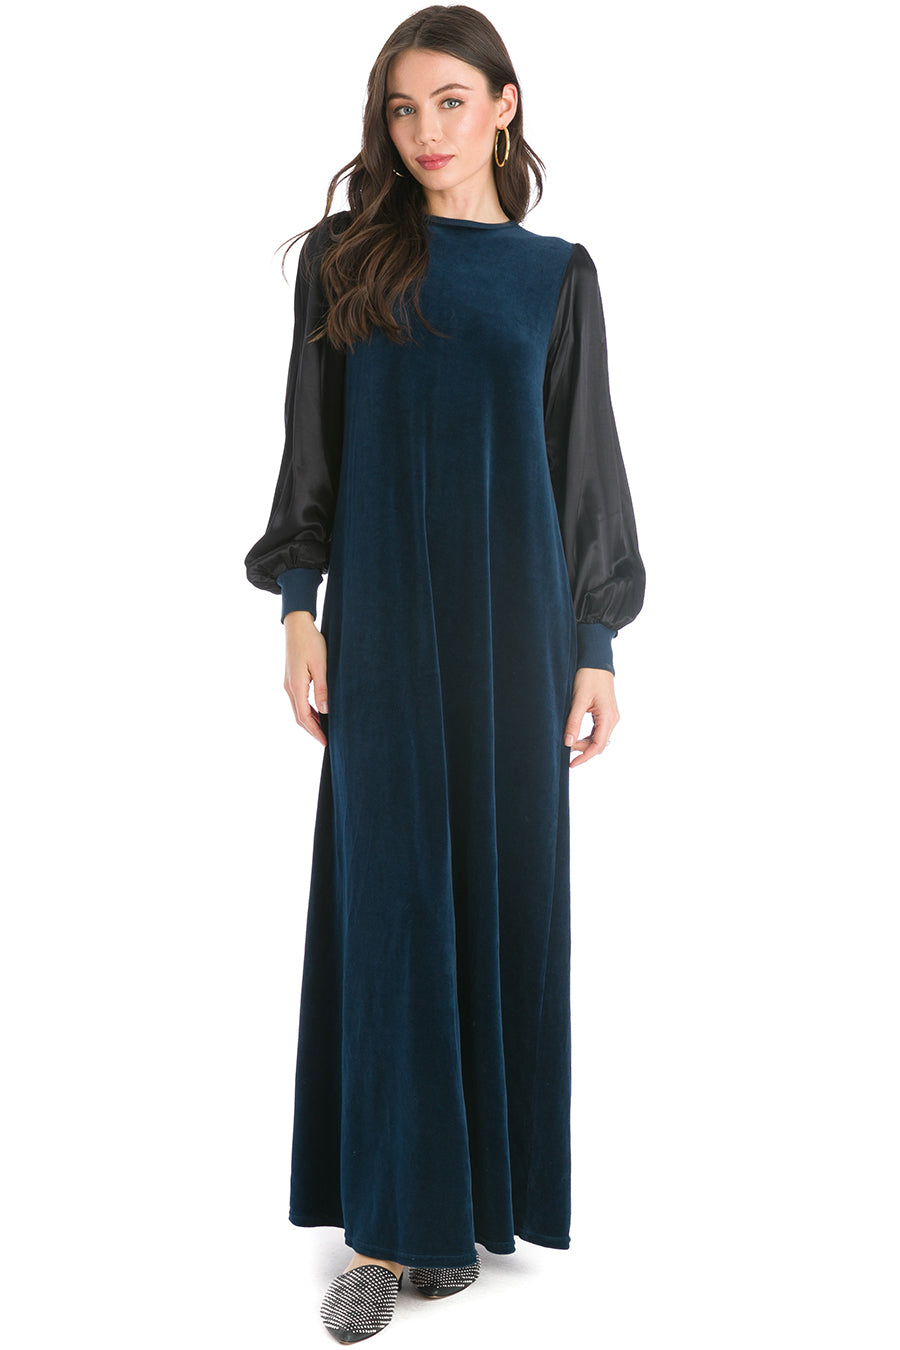 Hard Tail Forever Satin Puff Sleeve Velour Maxi Dress - Past